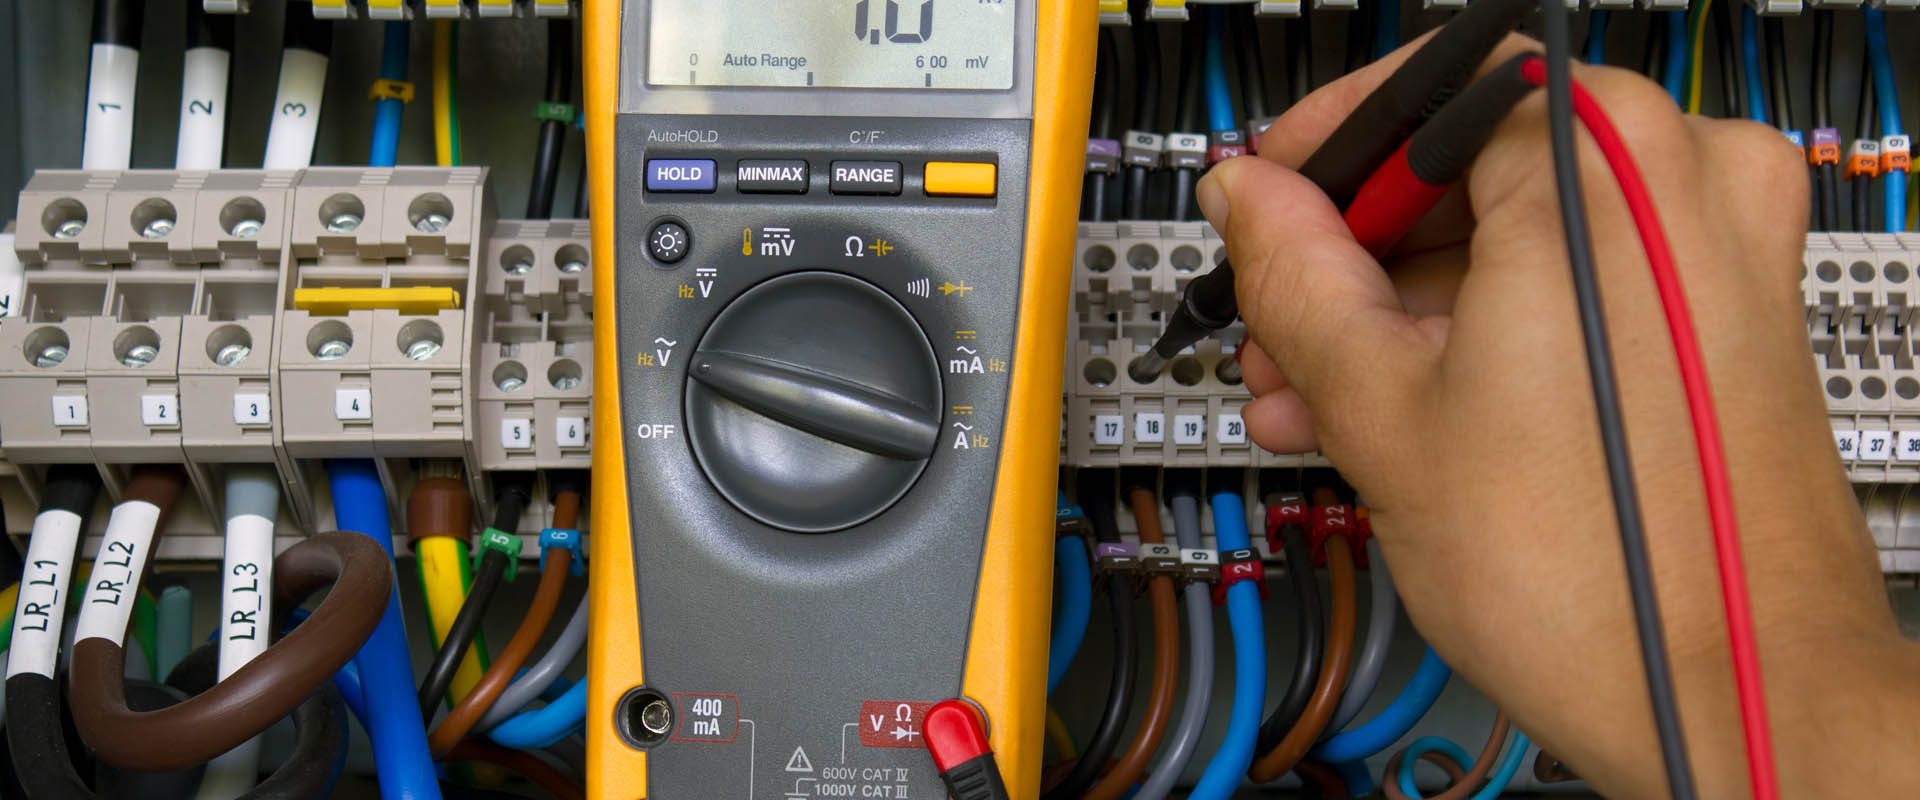 ELECTRICAL INSPECTION & TESTING